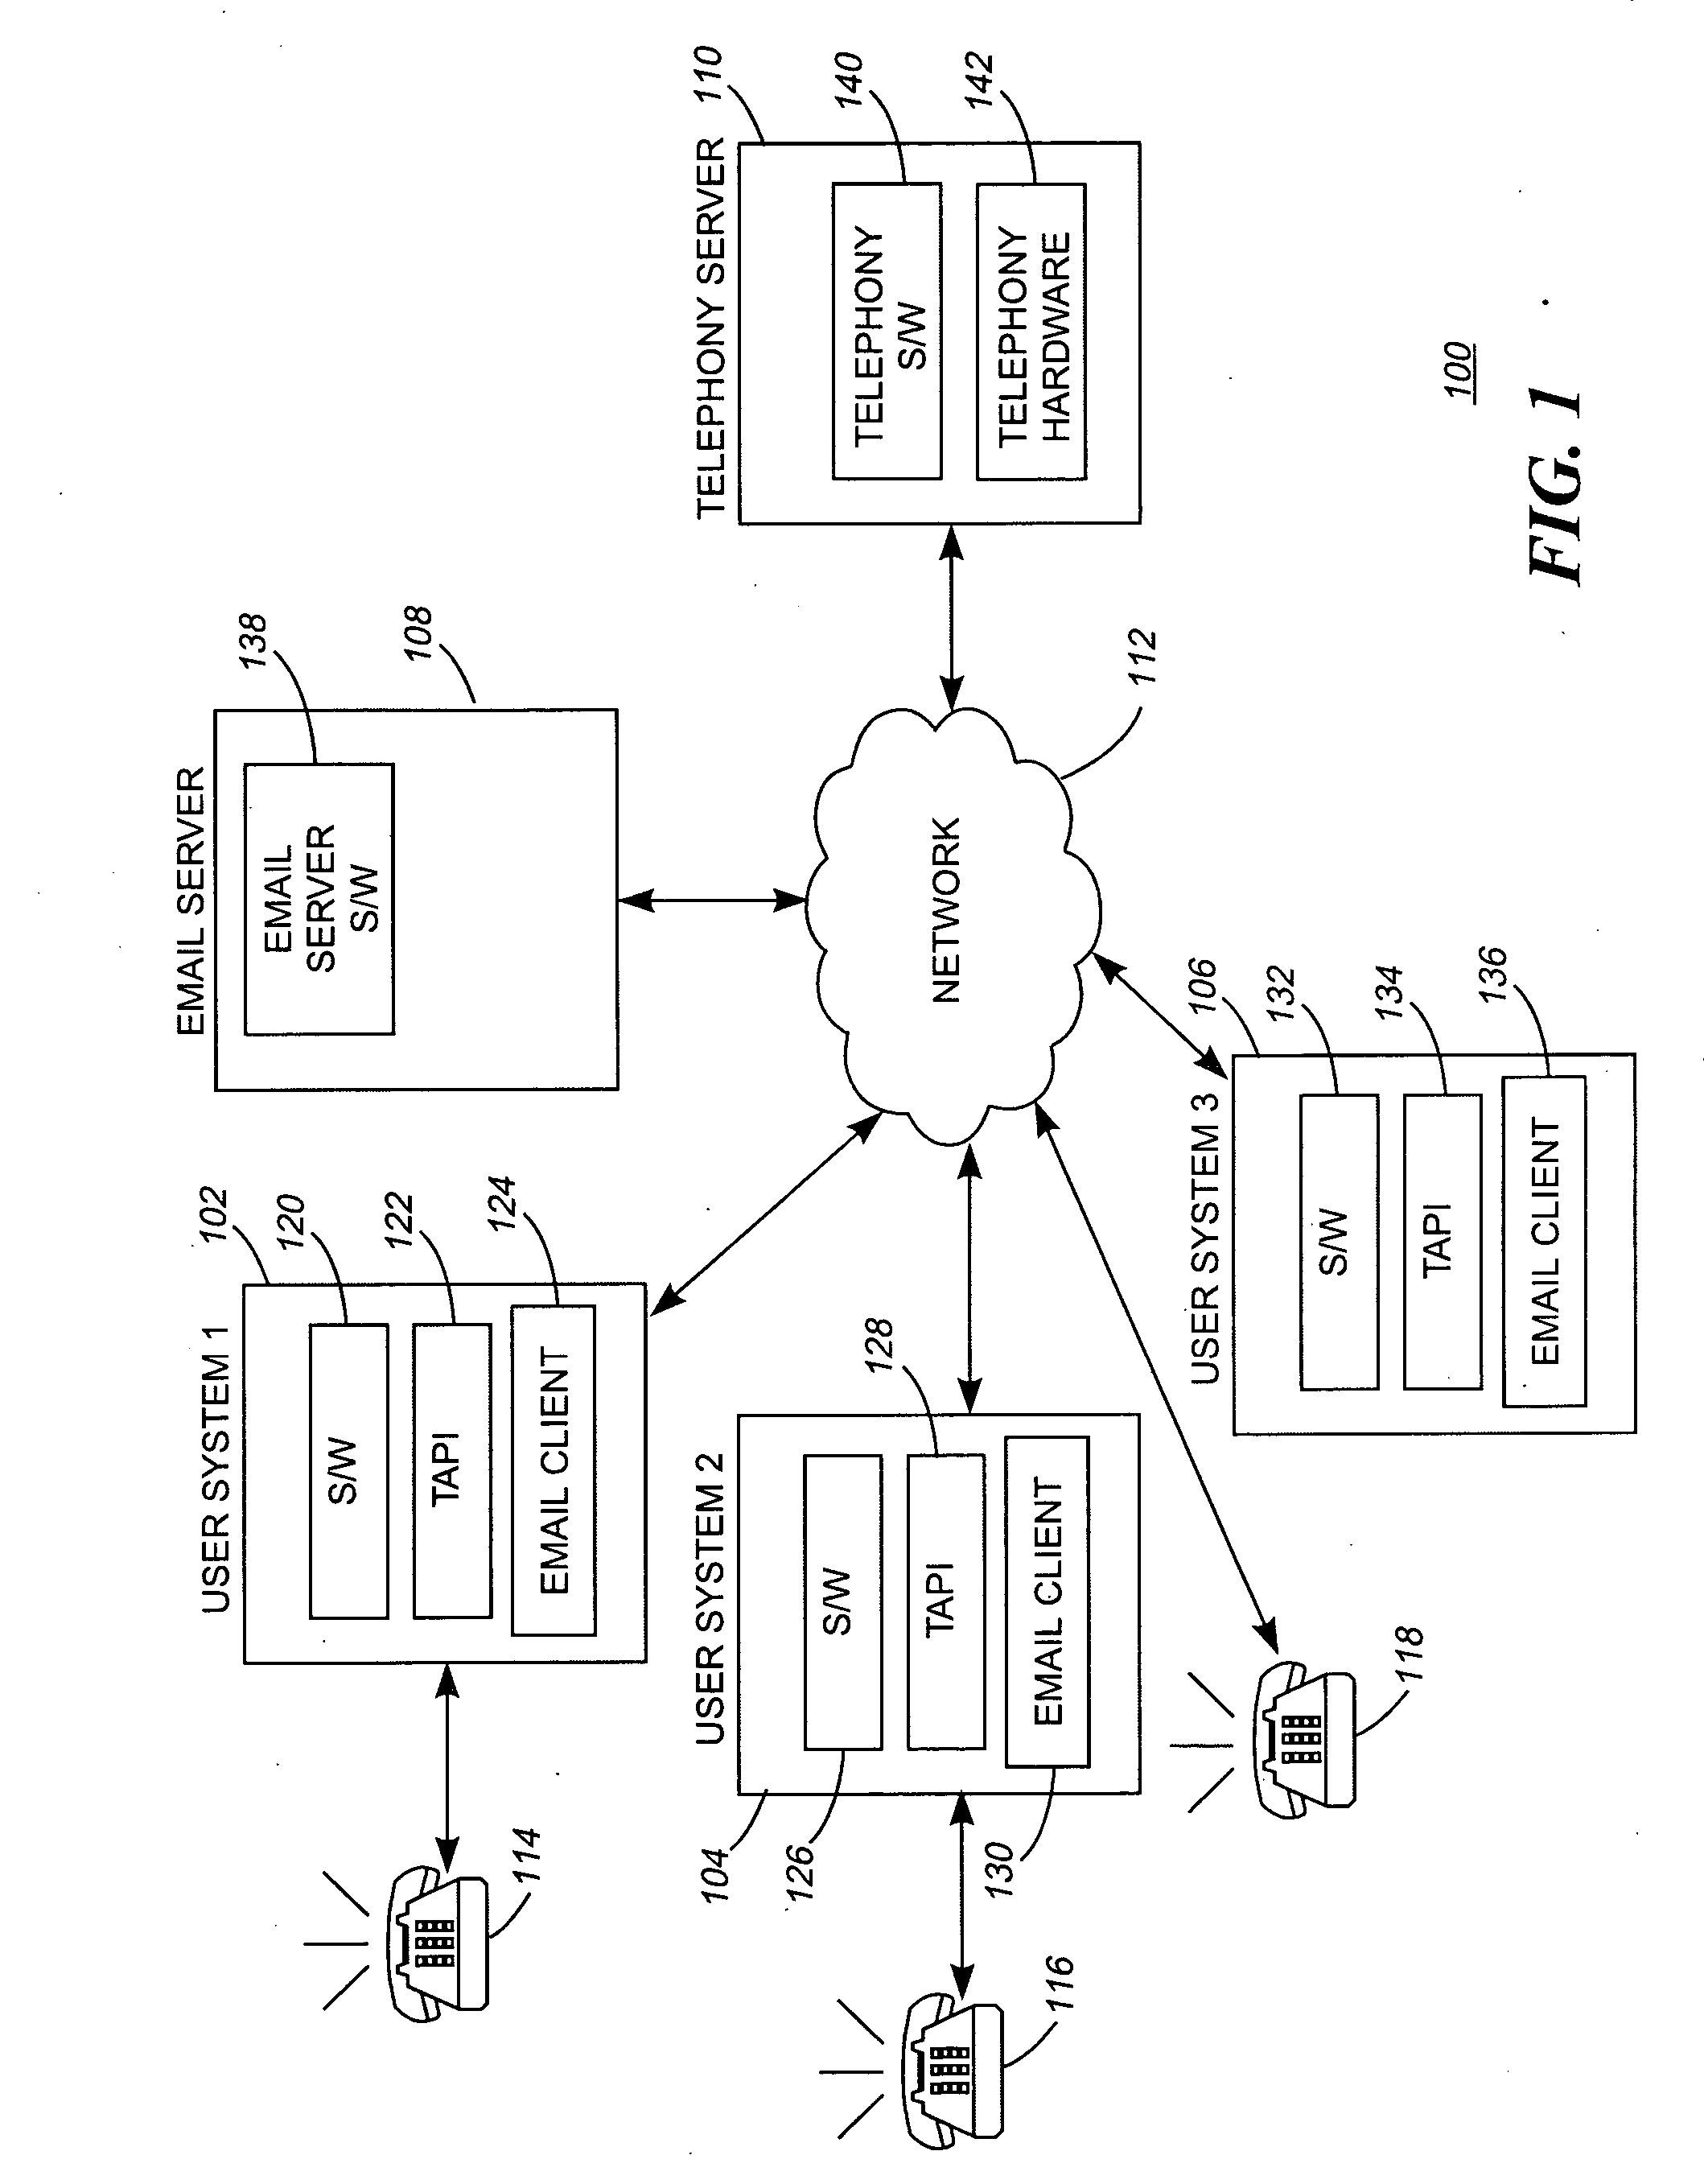 System and method for managing a conference call